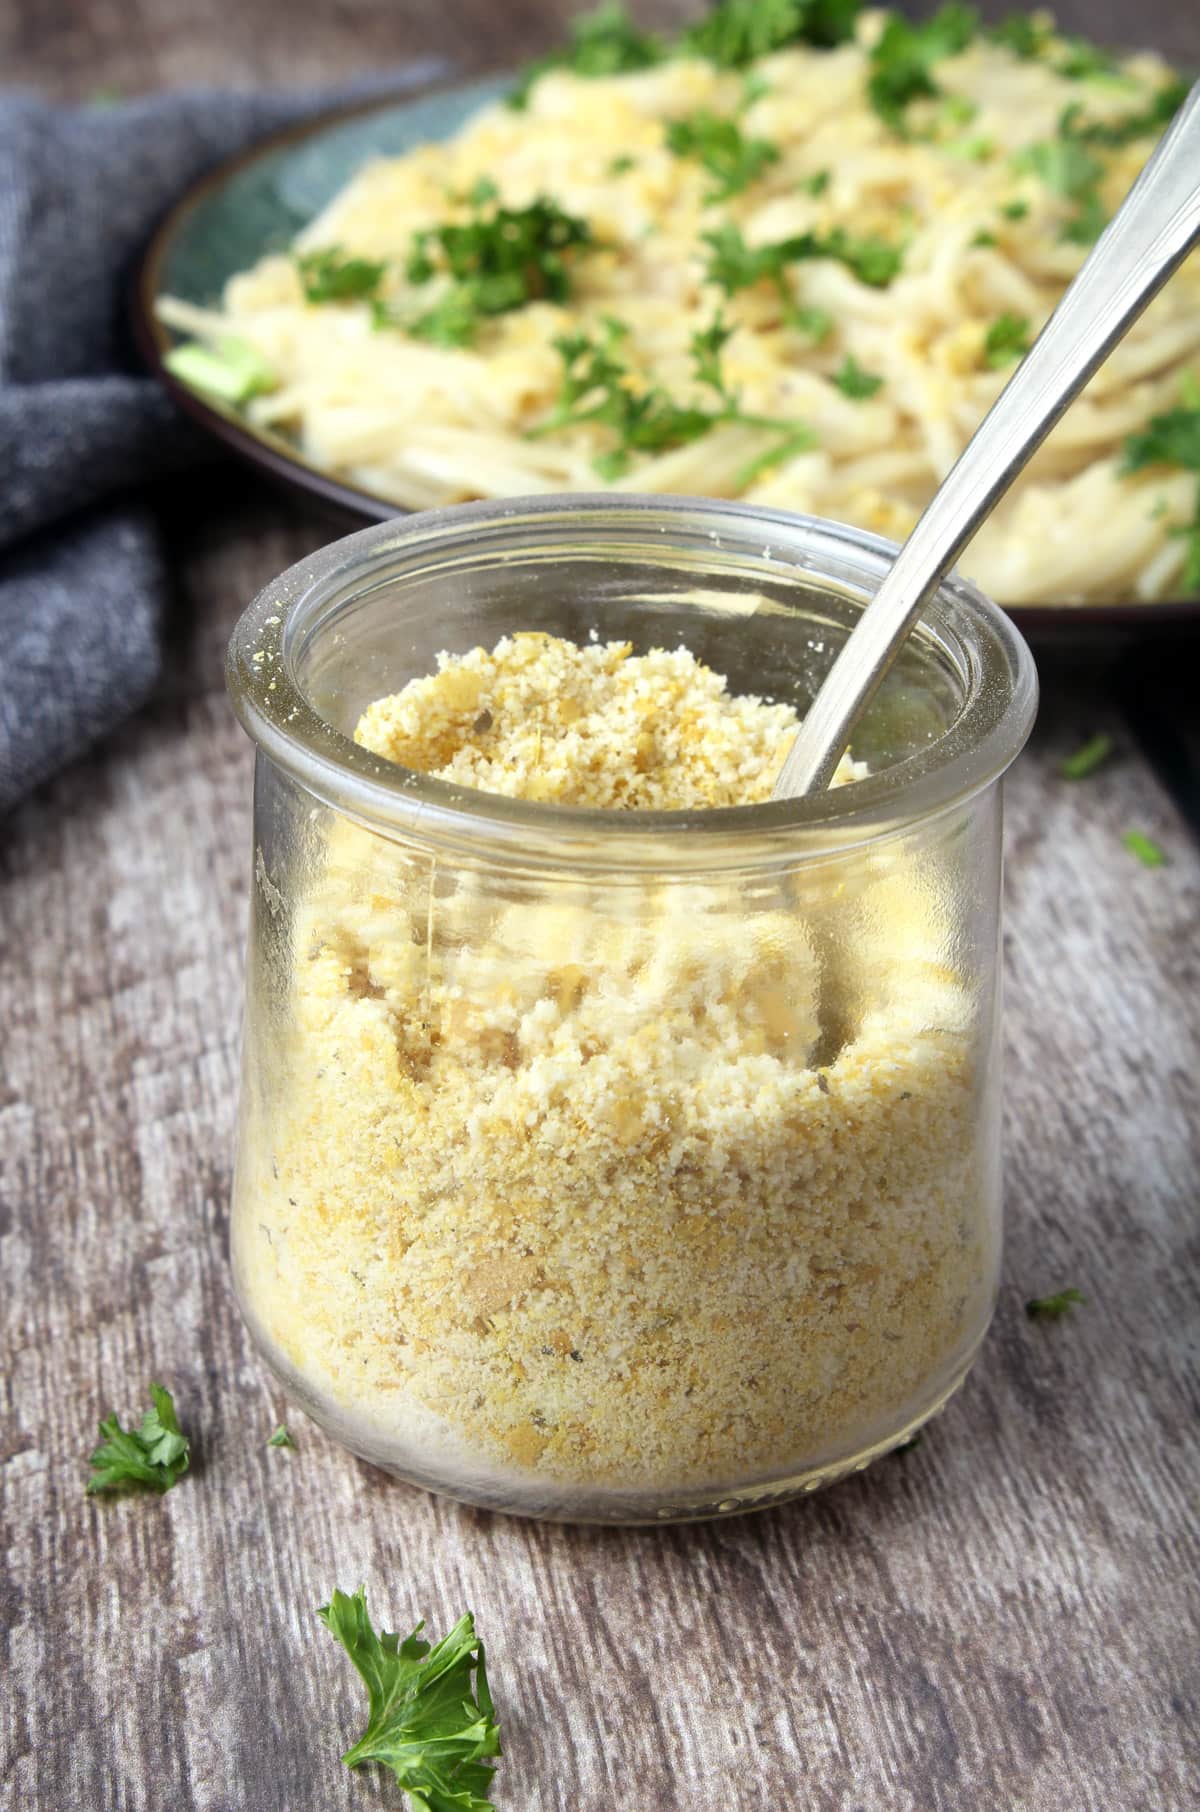 It's VEGAN PARMESAN CHEESE!!!! Now you can feel like a kid again with ENDLESS AMOUNTS of Parmesan on your noodles and All The Things! Takes 5 min. #veganparmesancheese #veganparmesancheeserecipe #vegancondiments #easyveganrecipes #vegancheeserecipe #vegancheese #bohemianvegankitchen